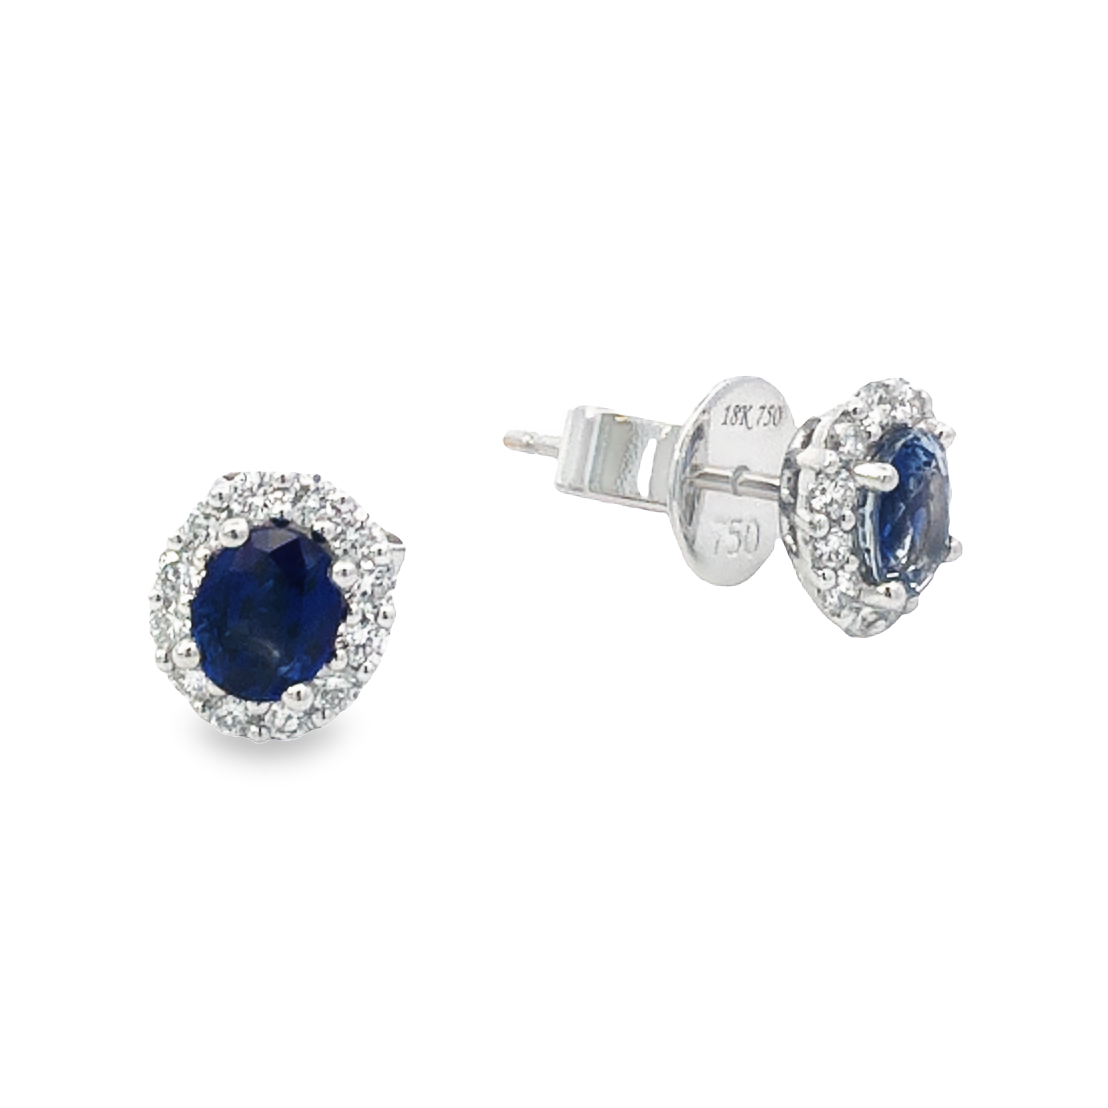 18K White Gold Sapphire and Diamond Halo Stud Earrings with 2 Oval Sapphires